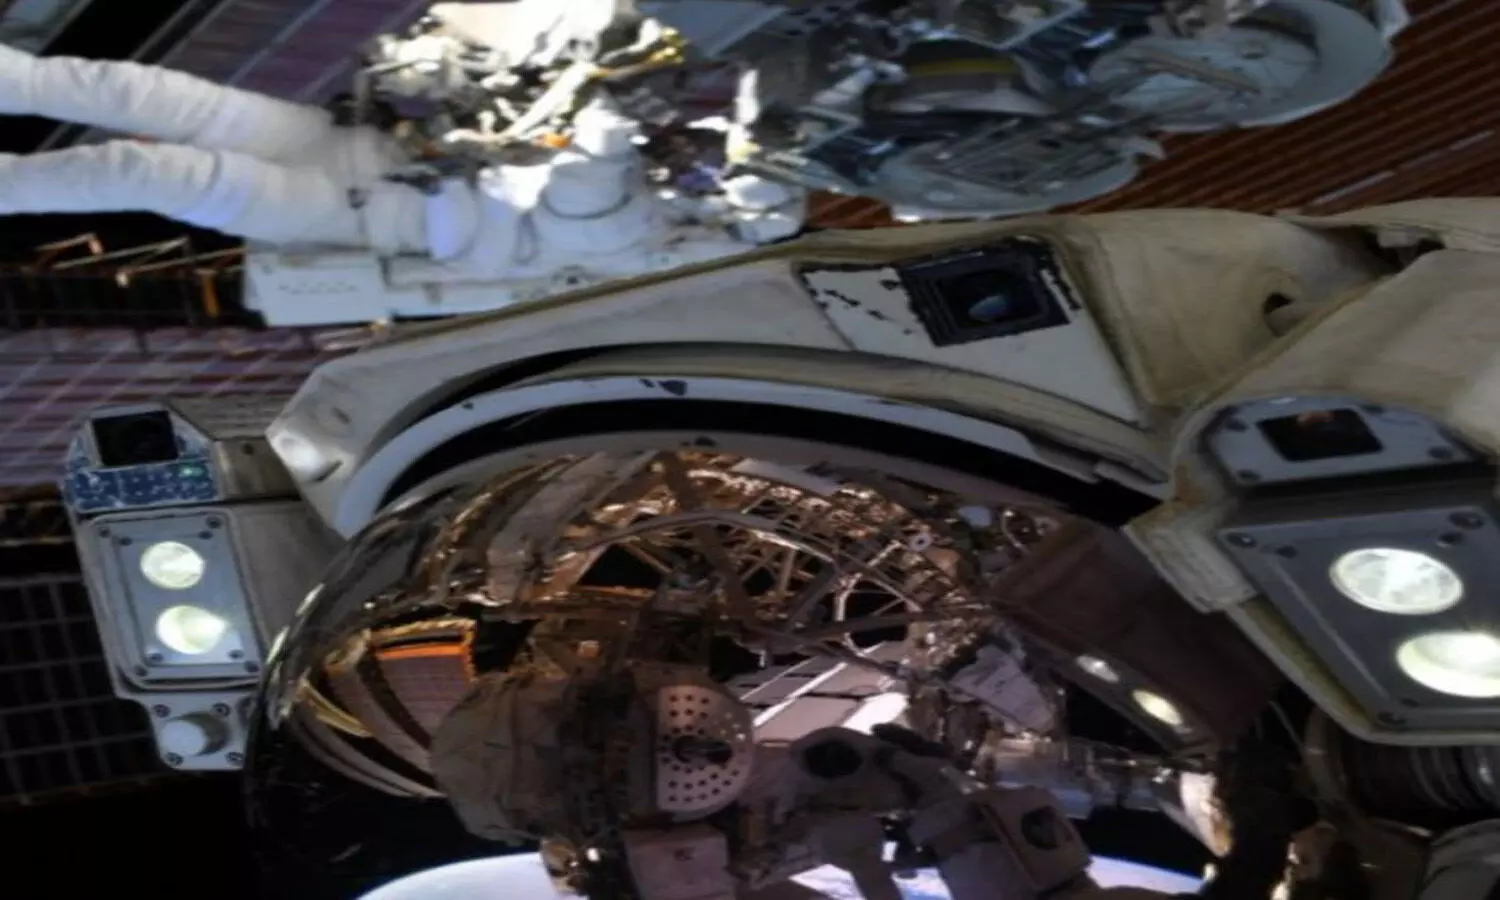 Photobombed in space: Astronauts Selfie during spacewalk goes viral; see PIC